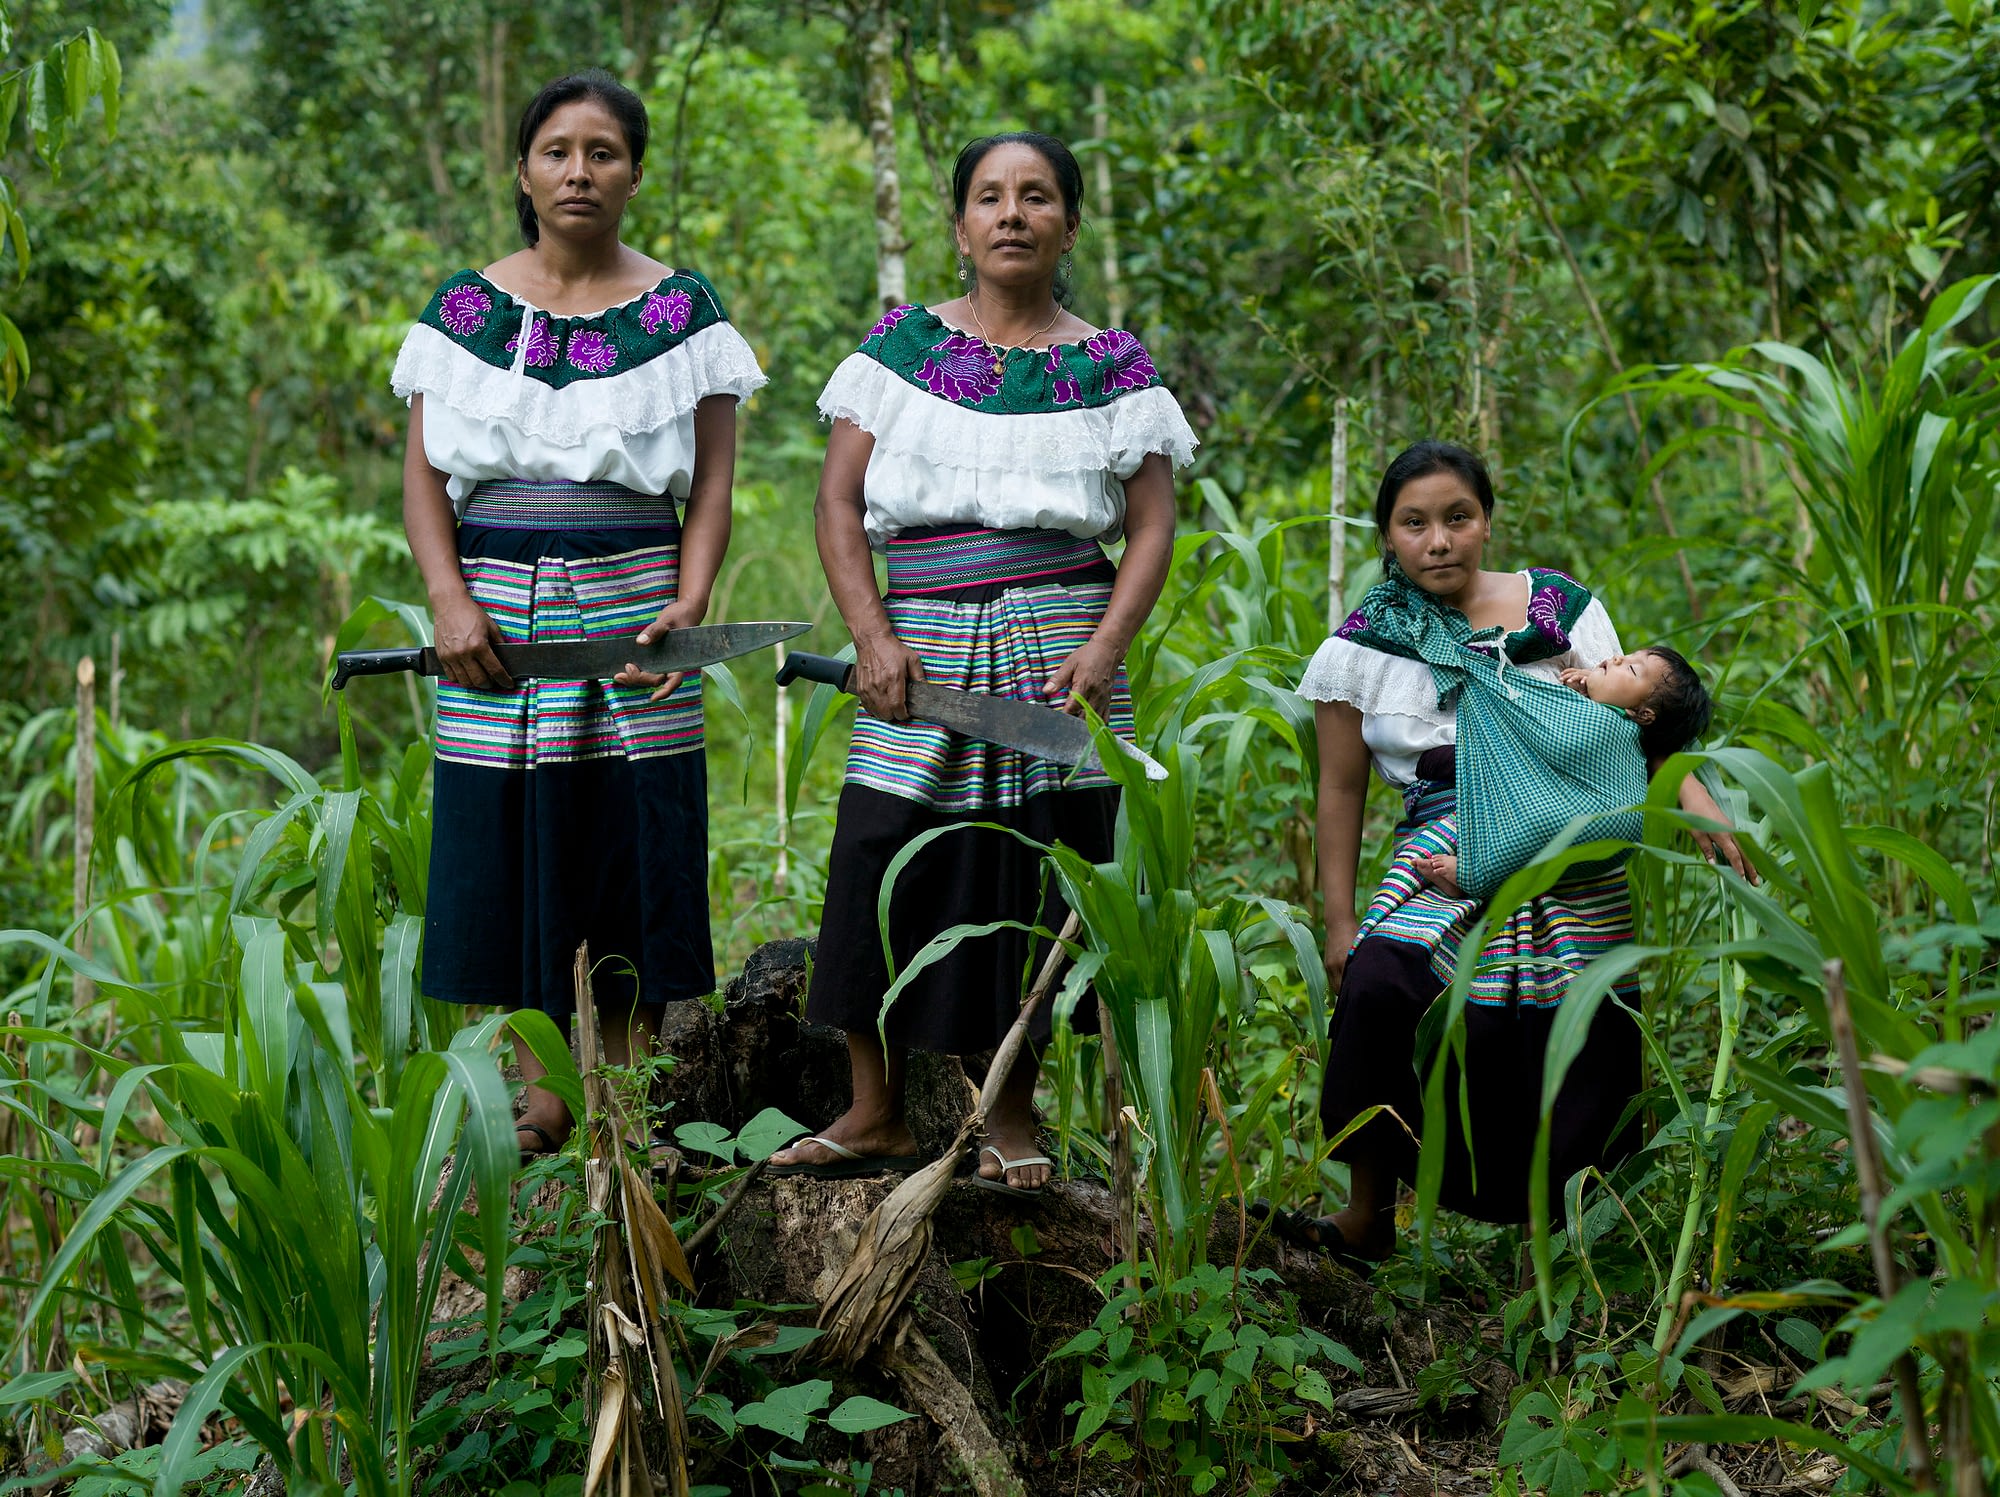 Tzeltal farmers in Chiapas, Mexico. (Photo: Peter Lowe for CIMMYT)